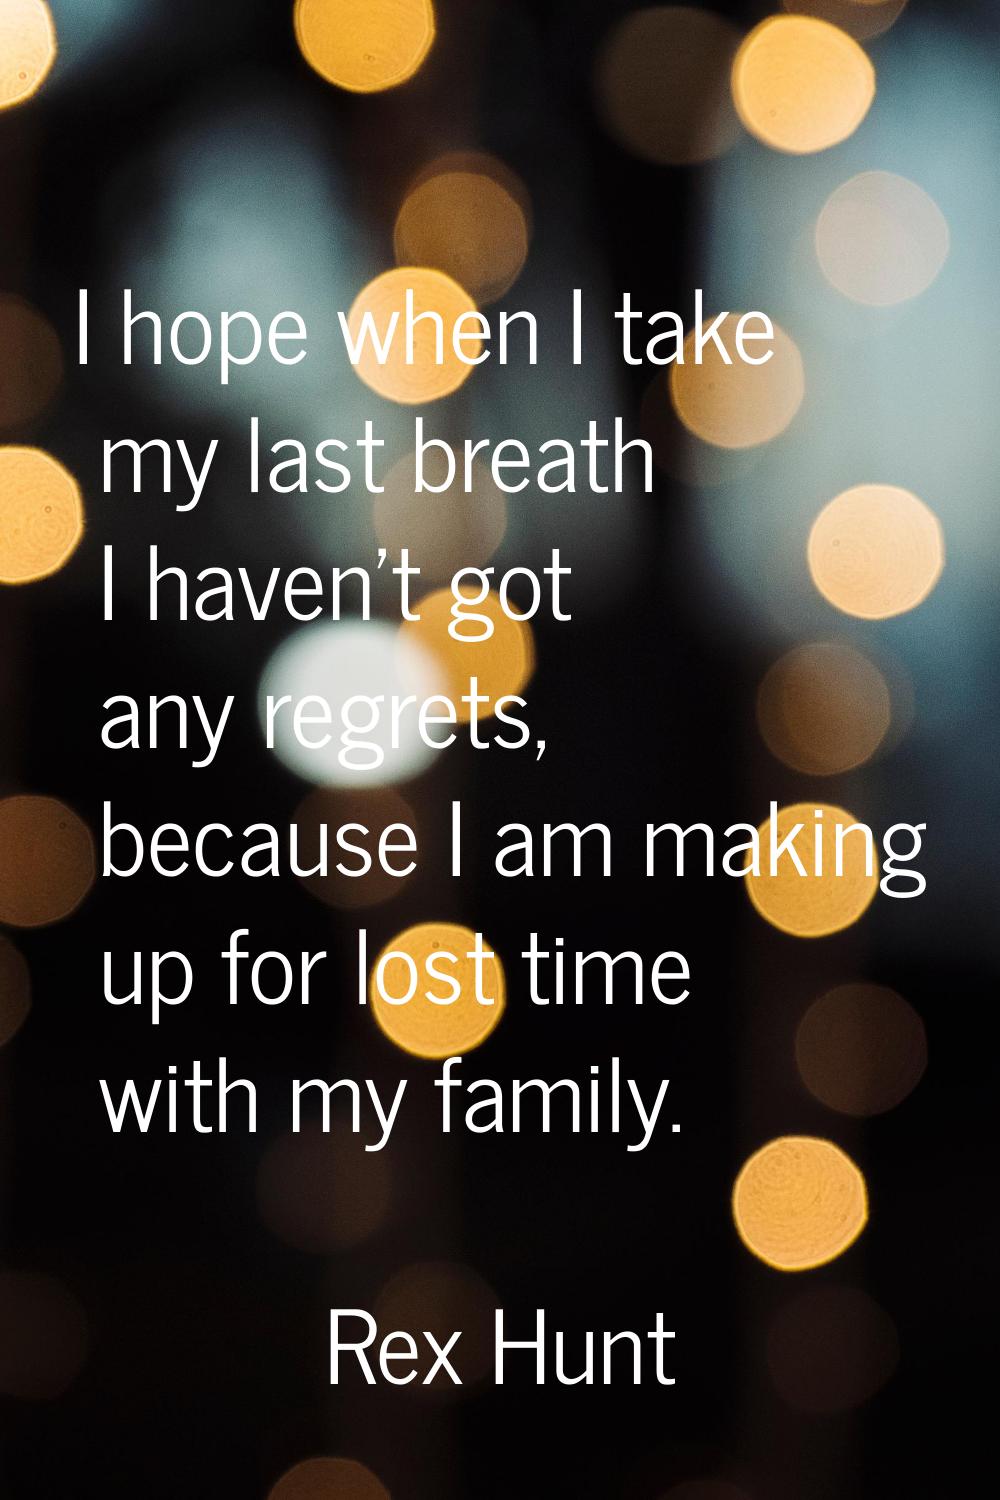 I hope when I take my last breath I haven't got any regrets, because I am making up for lost time w